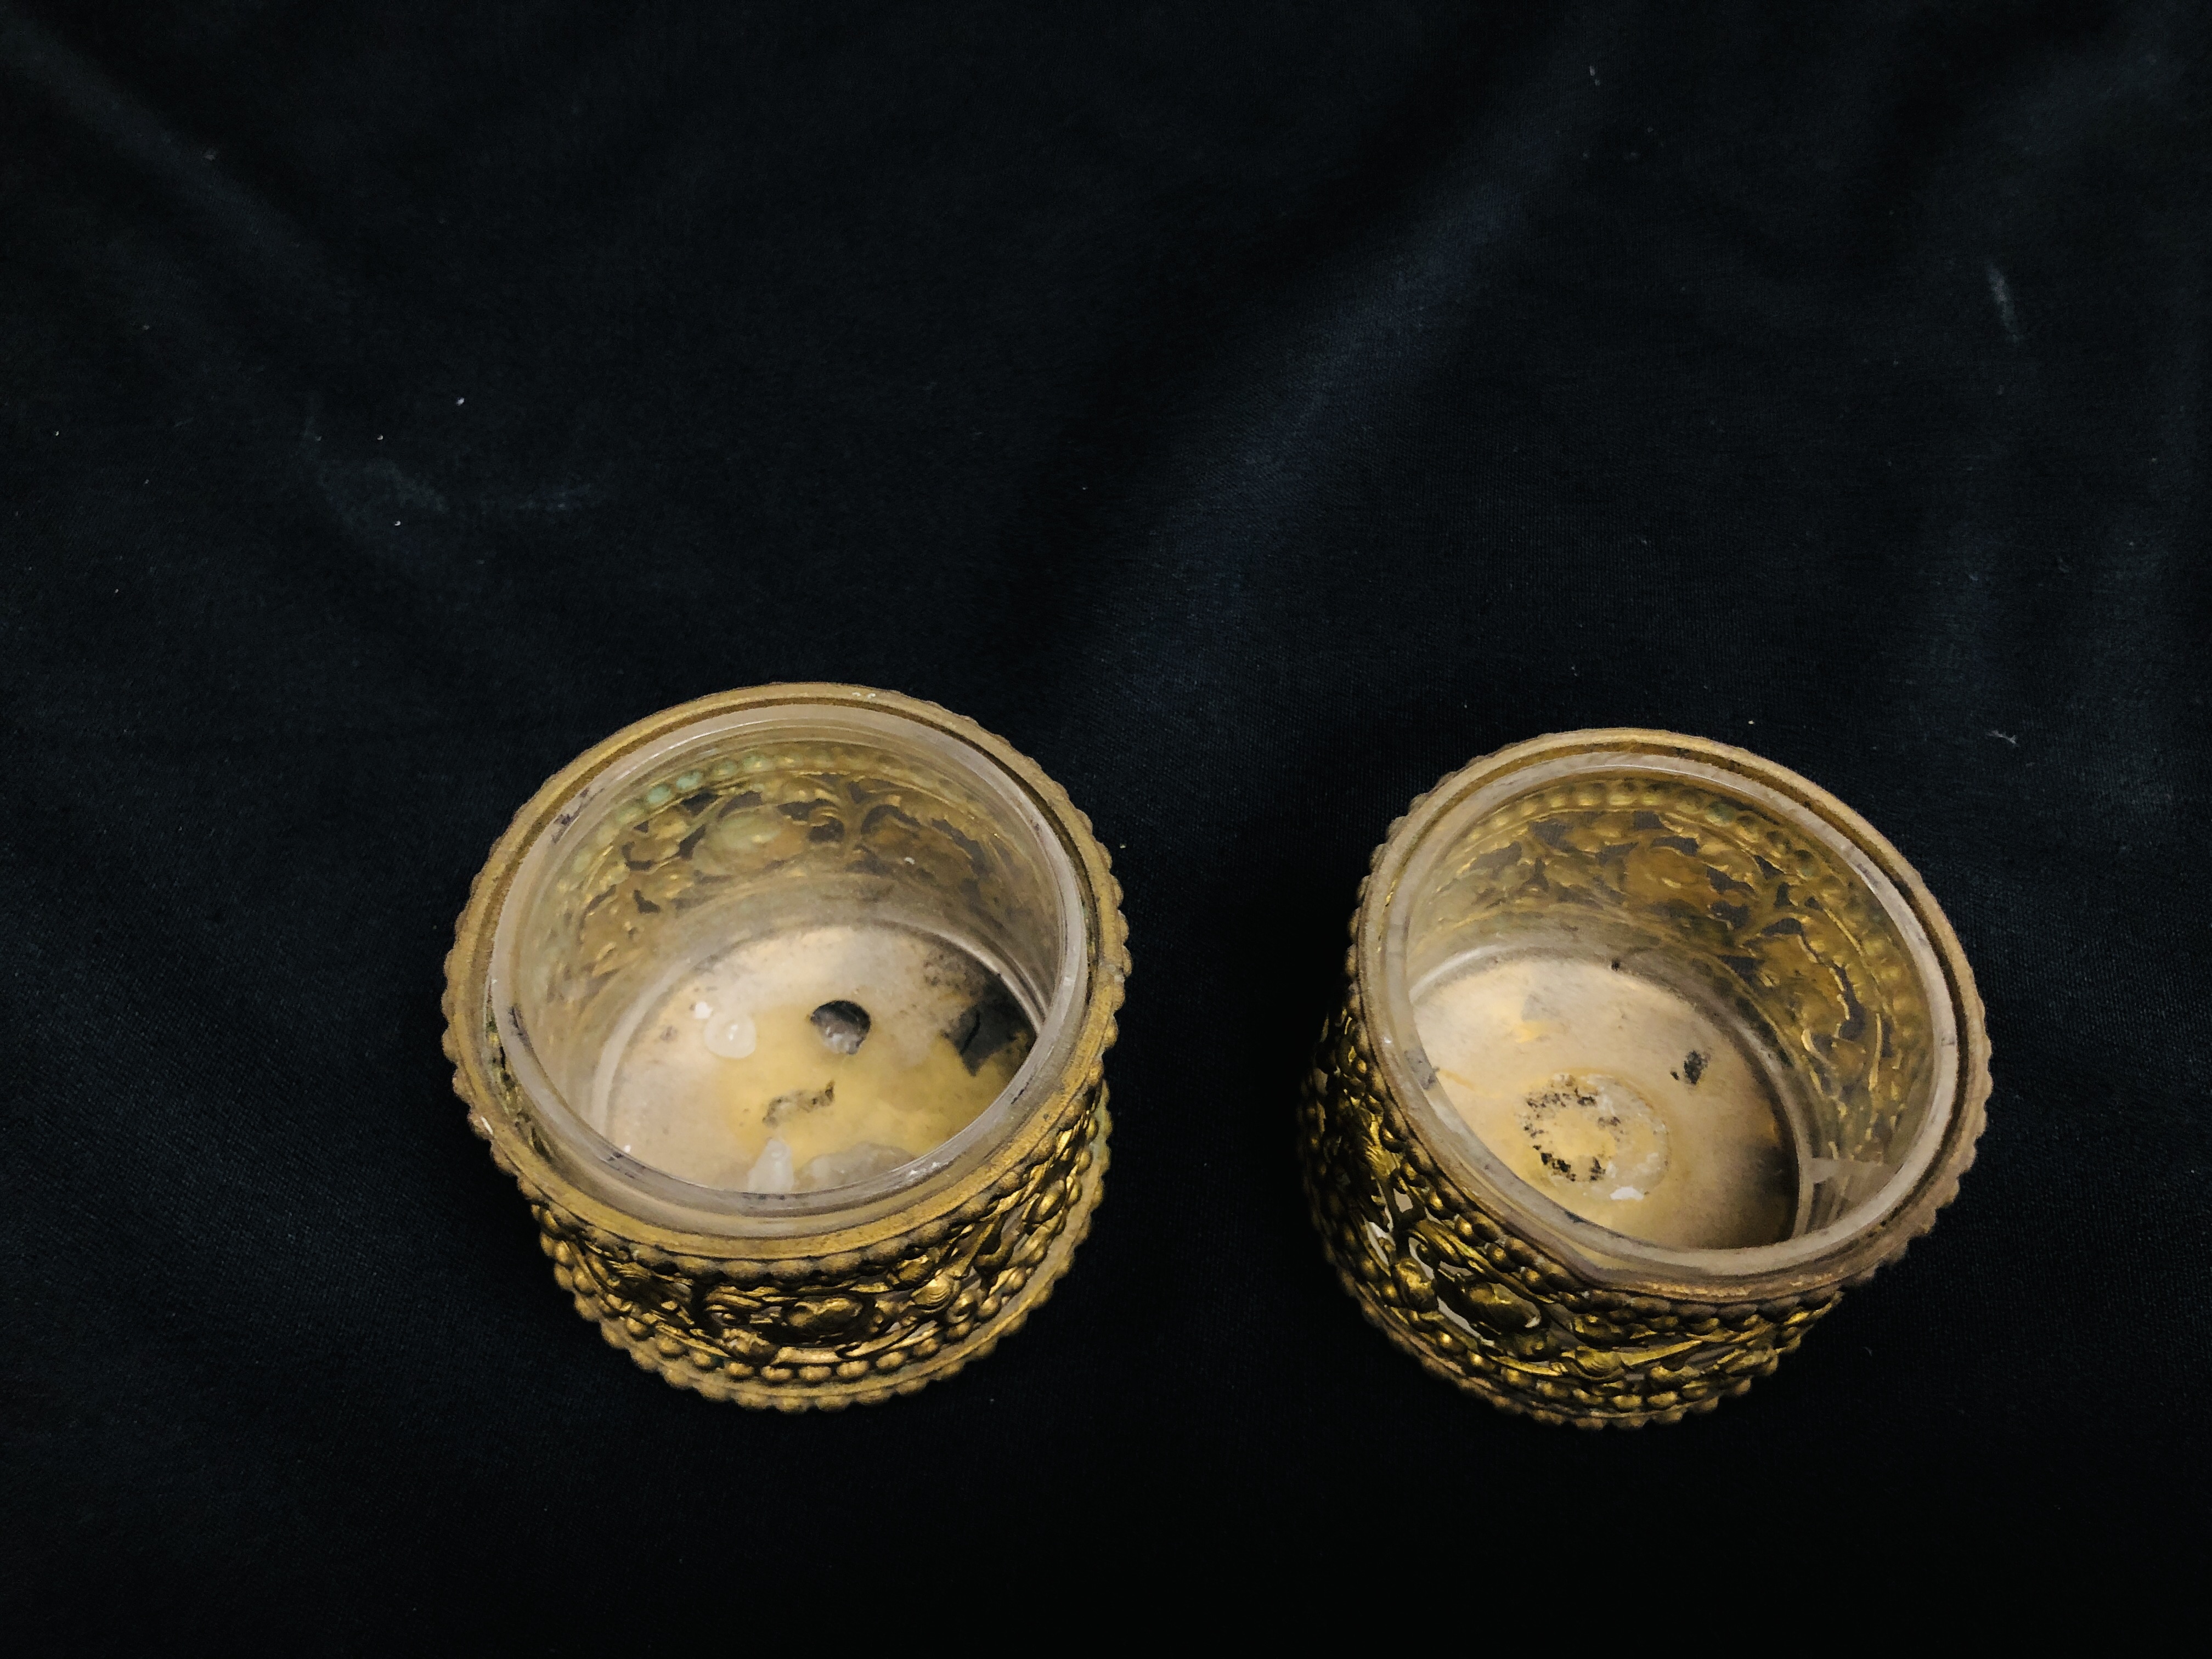 PAIR OF ANTIQUE GILT METAL SALTS WITH CLEAR GLASS LINERS - Image 2 of 4